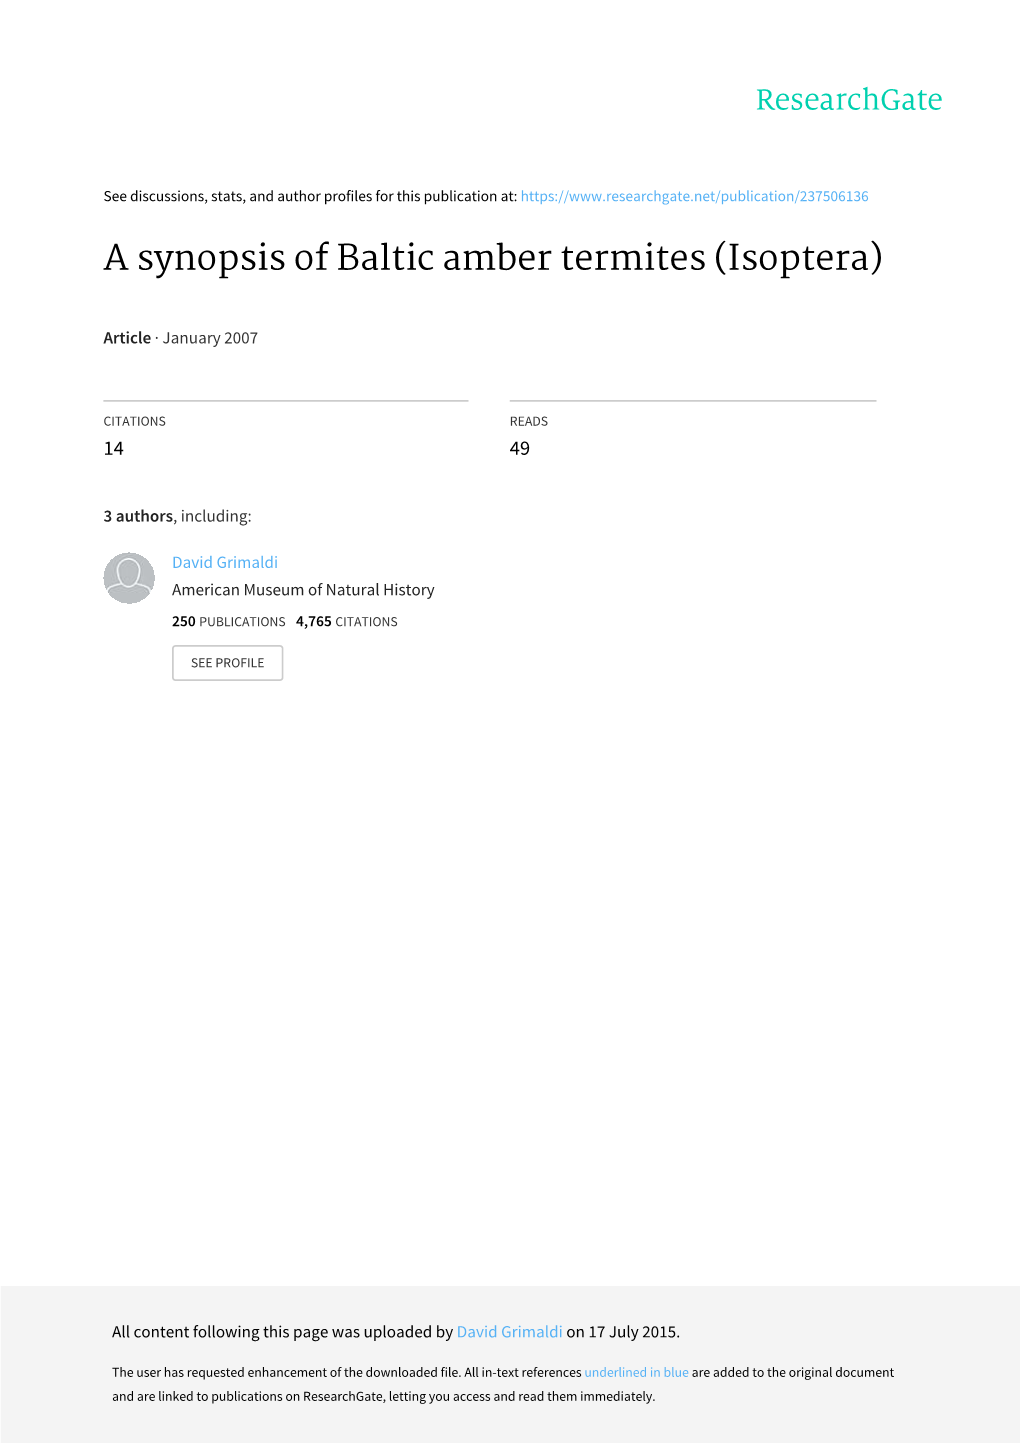 A Synopsis of Baltic Amber Termites (Isoptera)